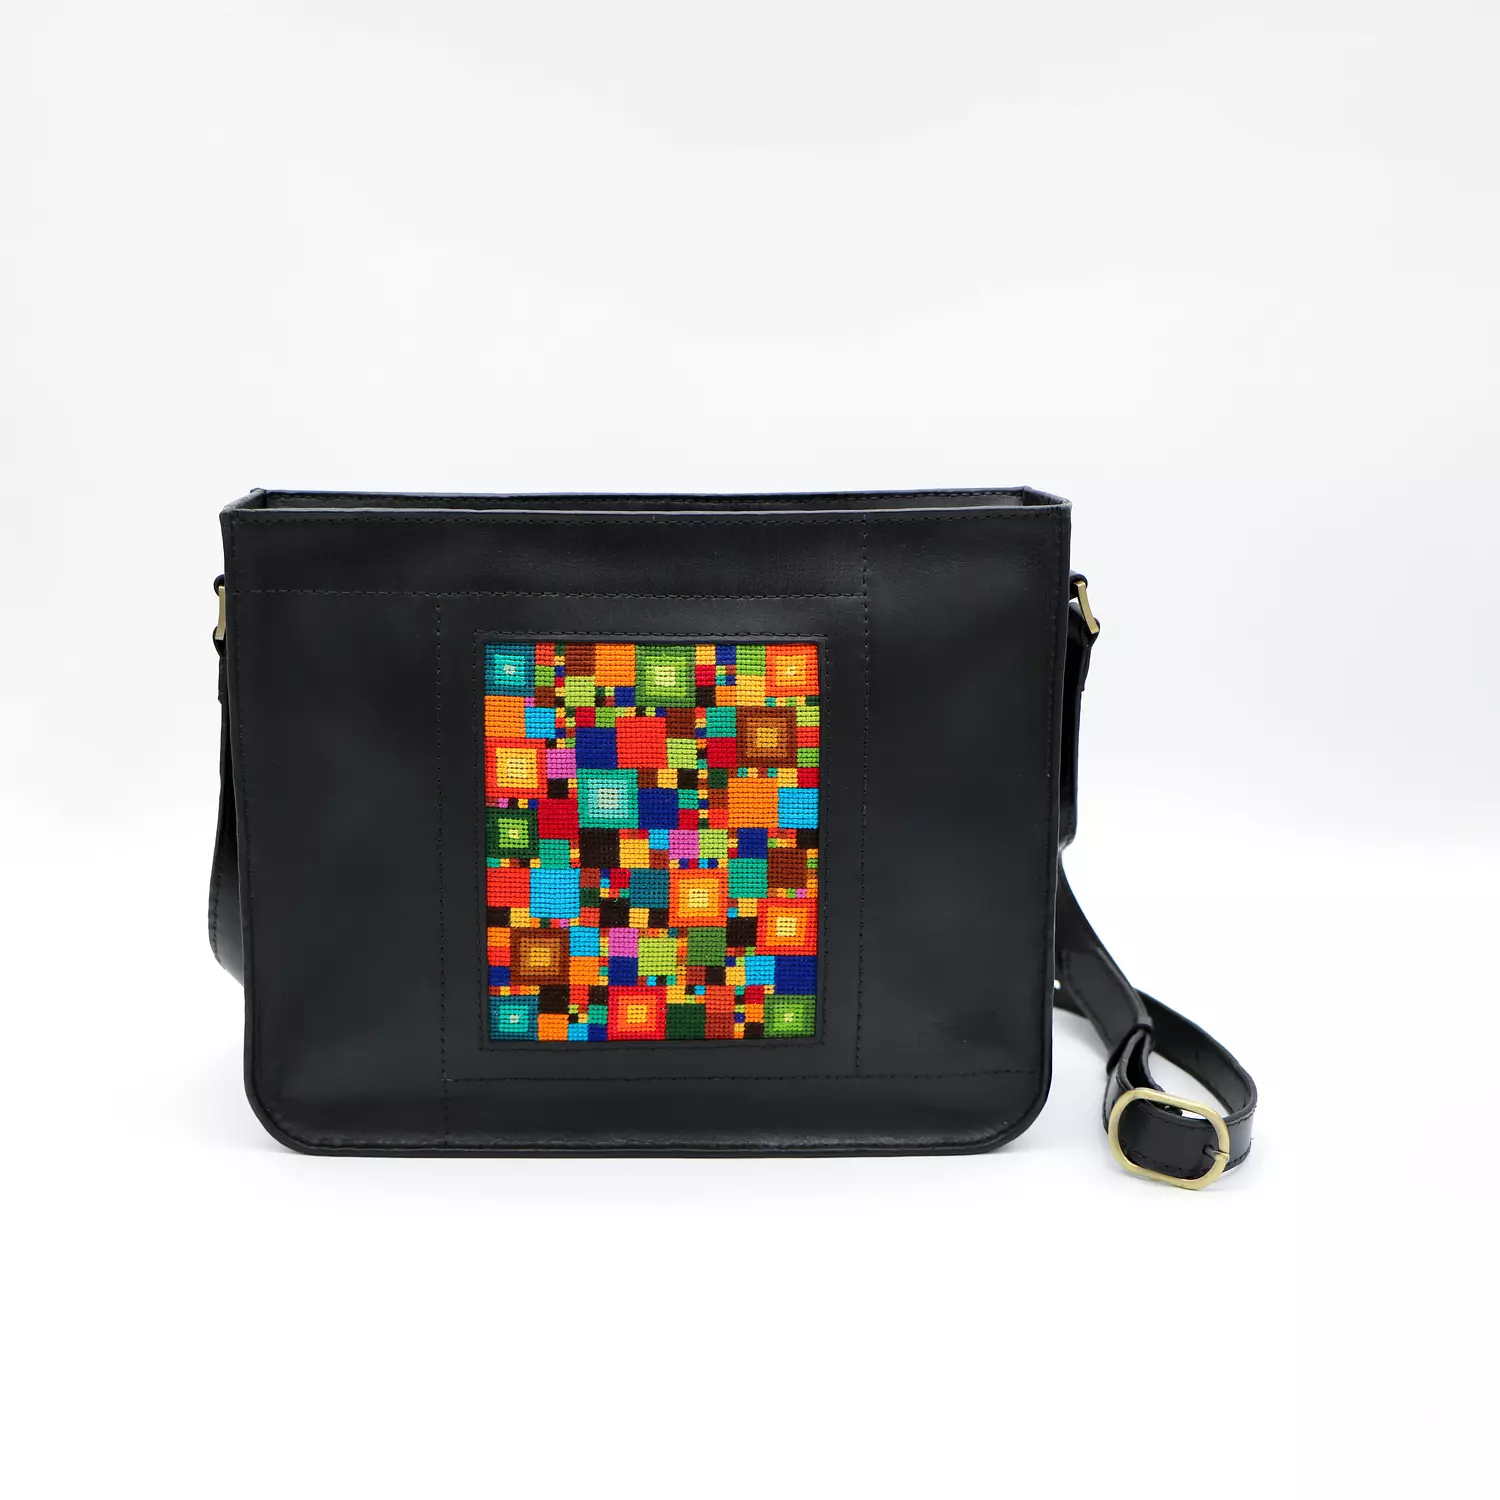 Genuine leather bag with colorful Cross-stitching. hover image